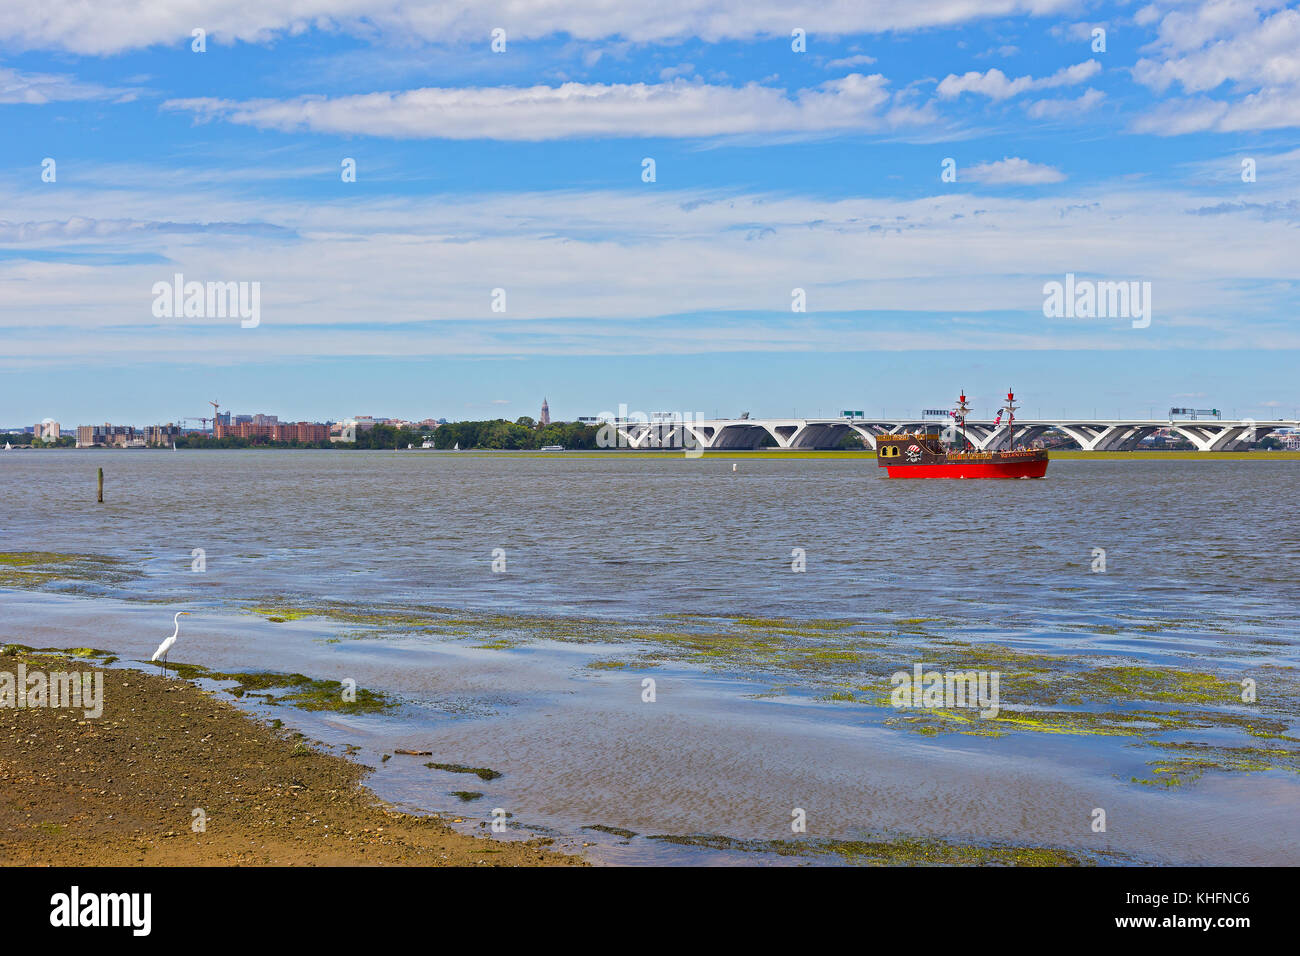 OXON HILL, MARYLAND, USA – SEPTEMBER 11: Potomac River panorama at National Harbor on September 11, 2016. Commercial vessel and two onlookers, Woodrow Stock Photo